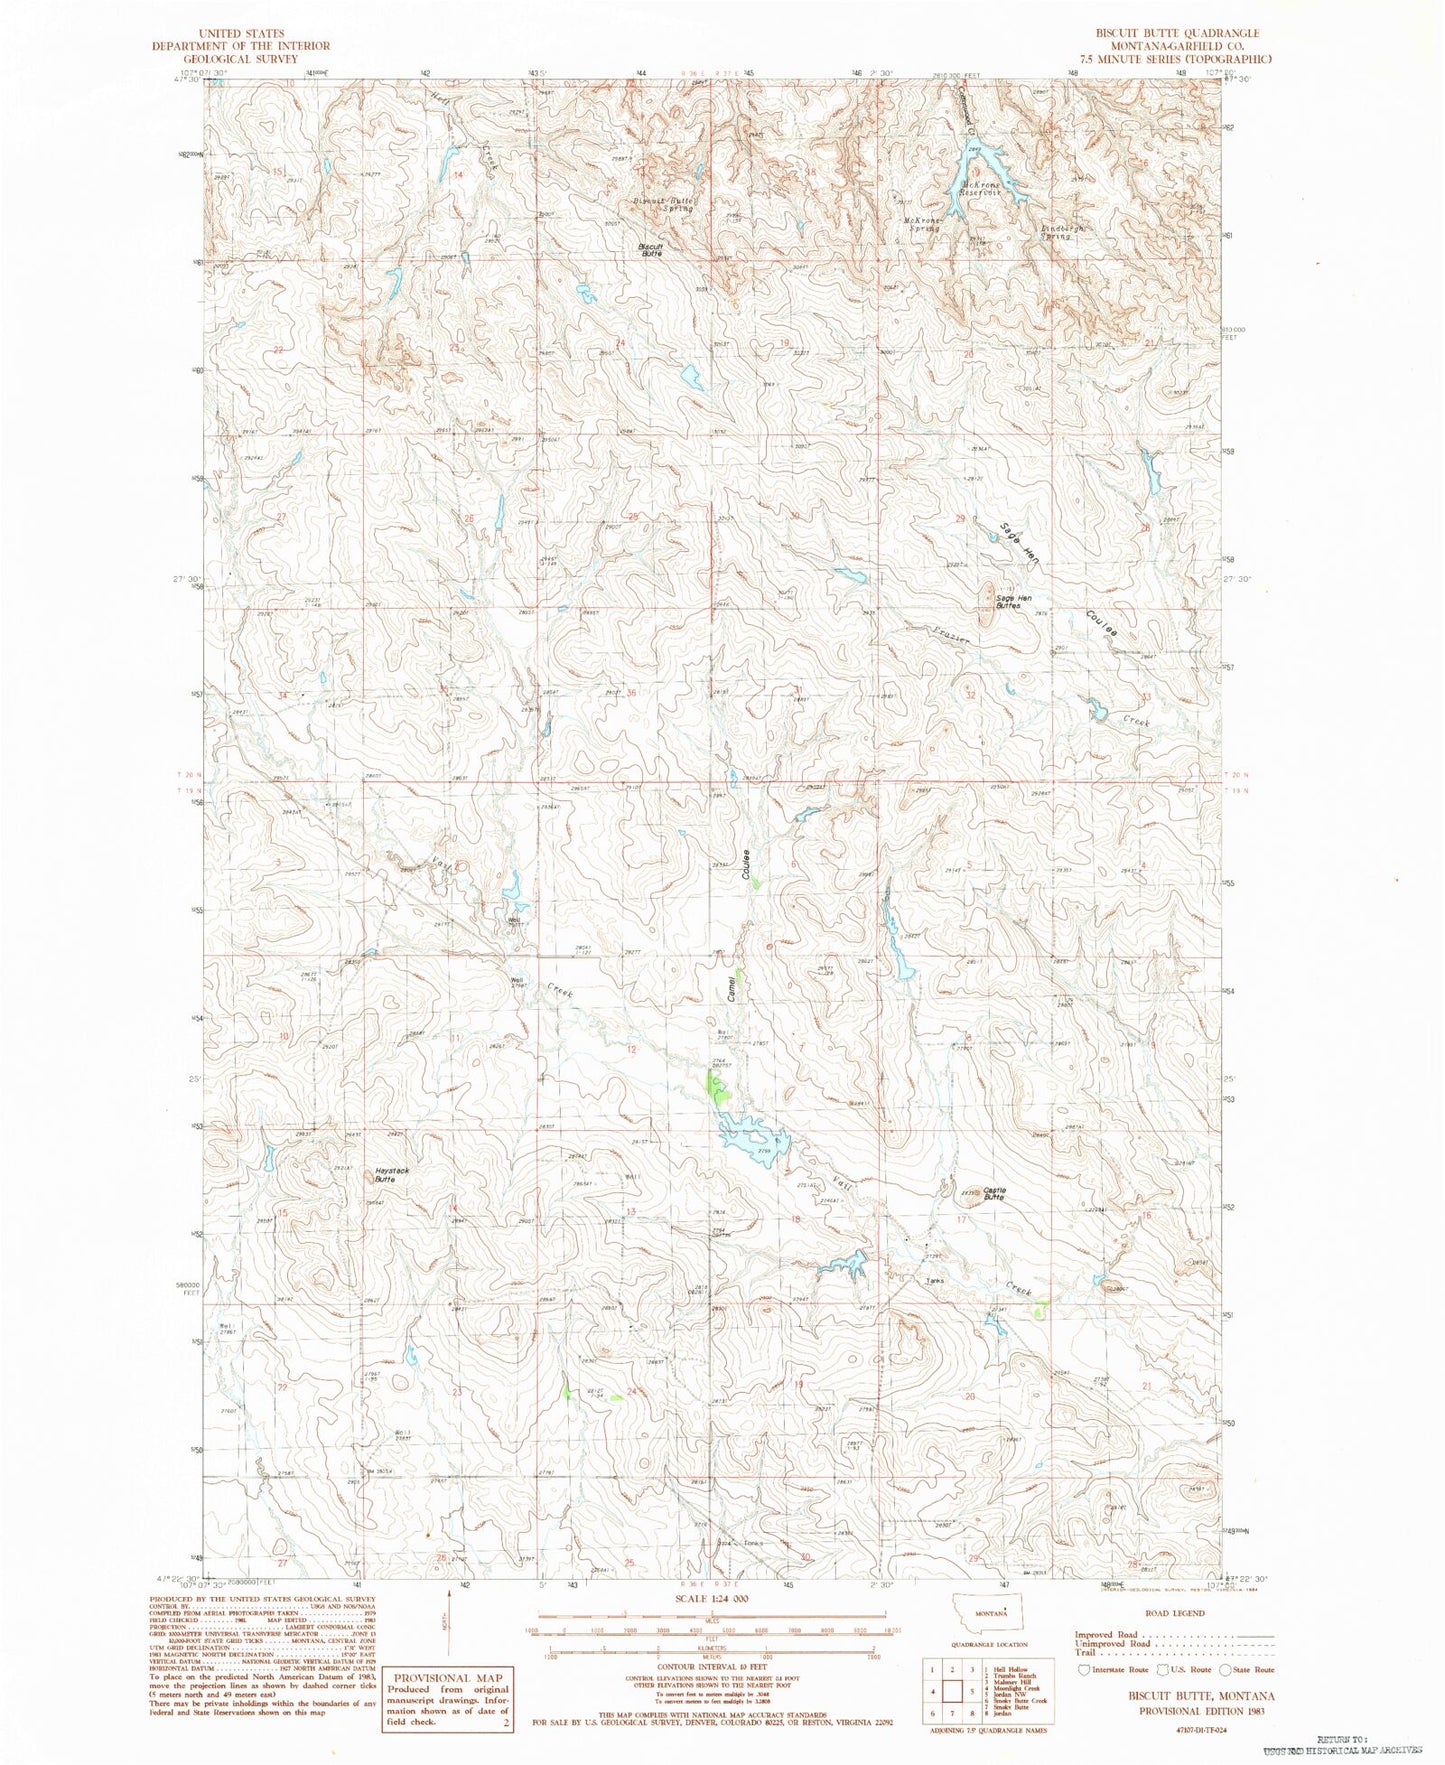 Classic USGS Biscuit Butte Montana 7.5'x7.5' Topo Map Image